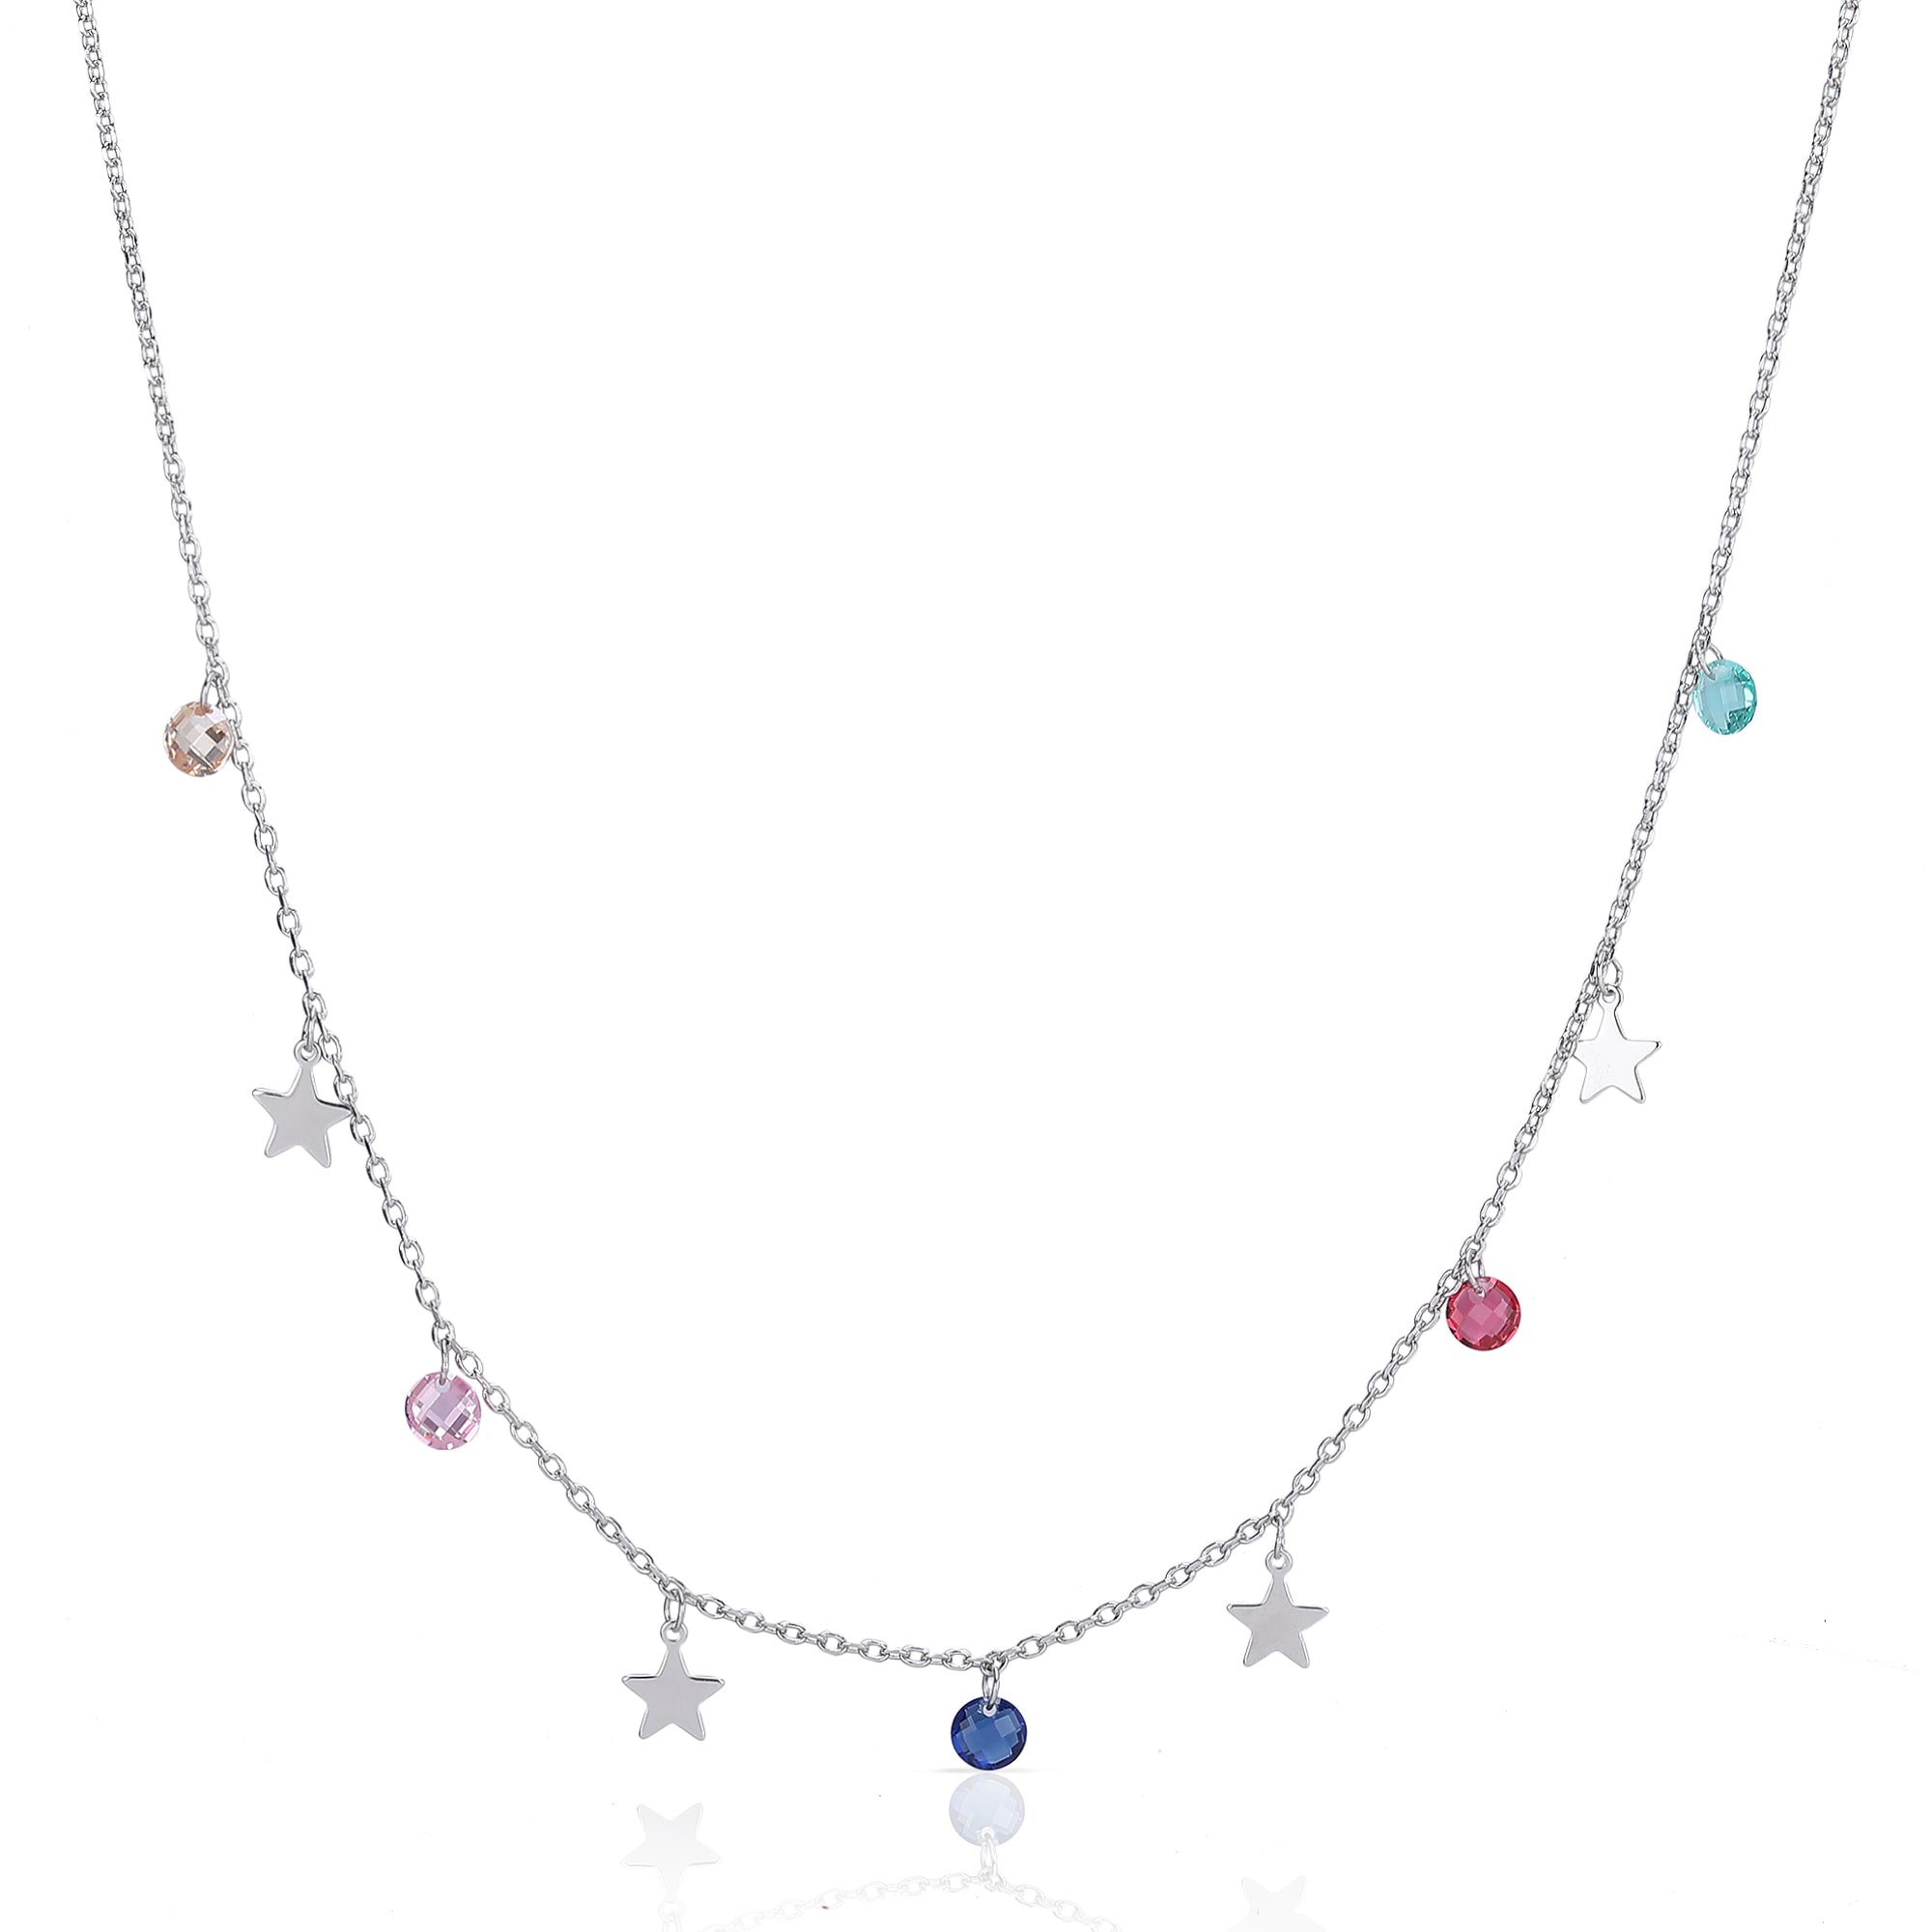 Rainbow necklace with star chain